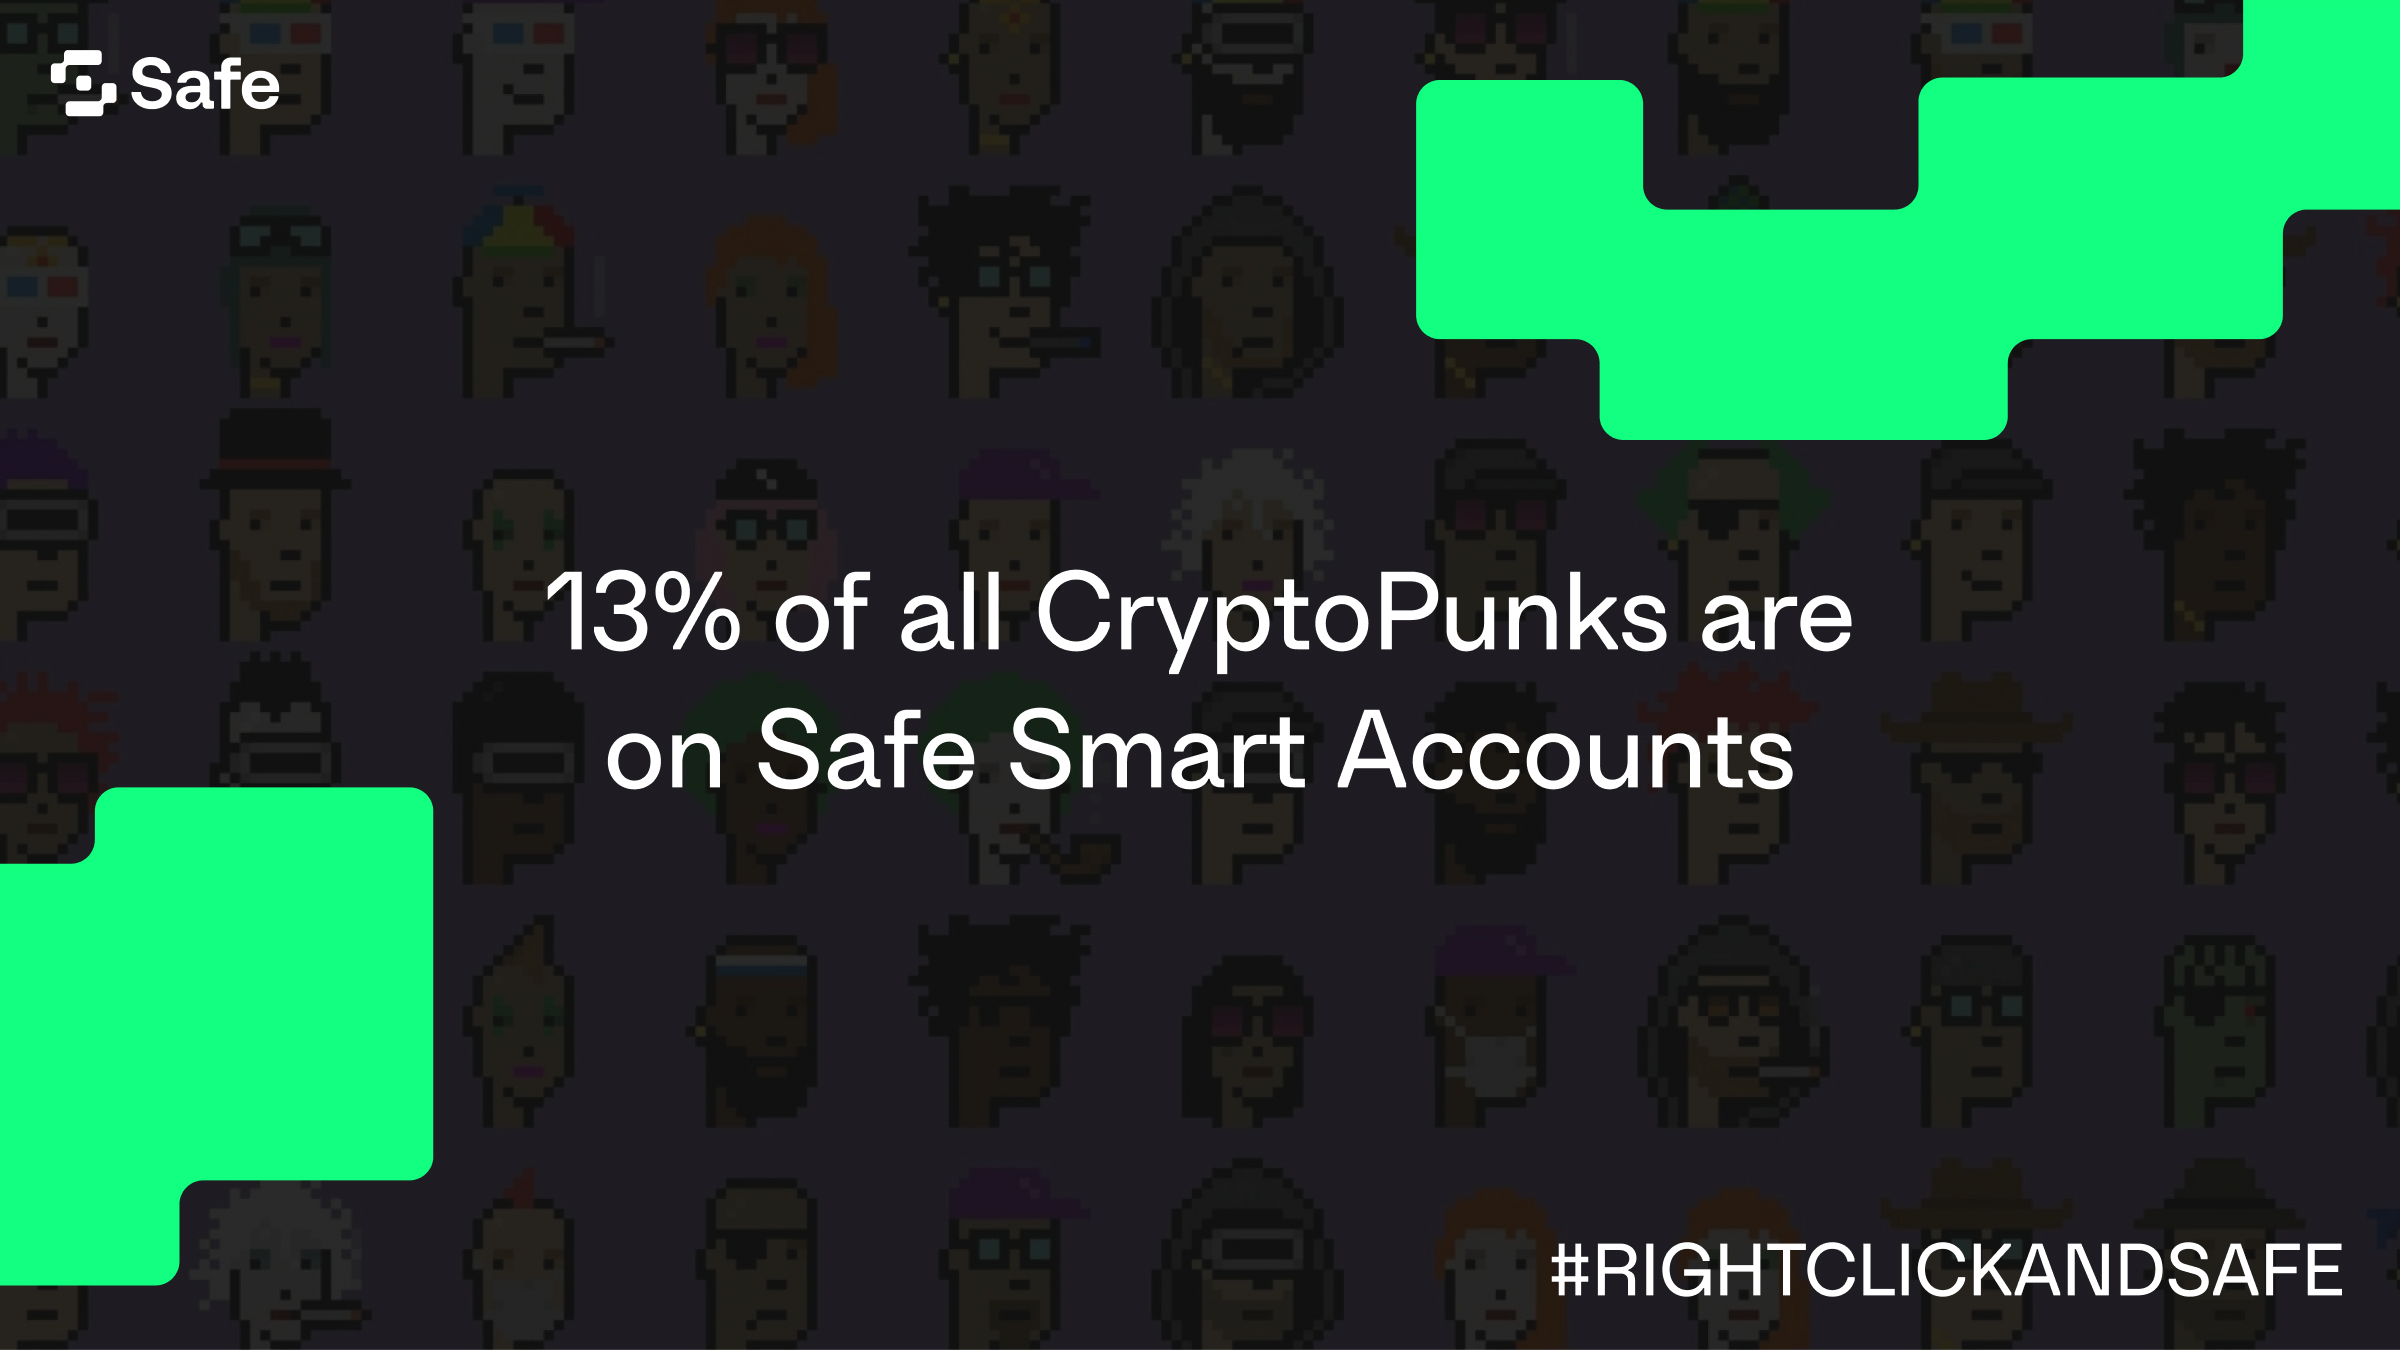 12.94% of CryptoPunks find a security fortress in Safe.